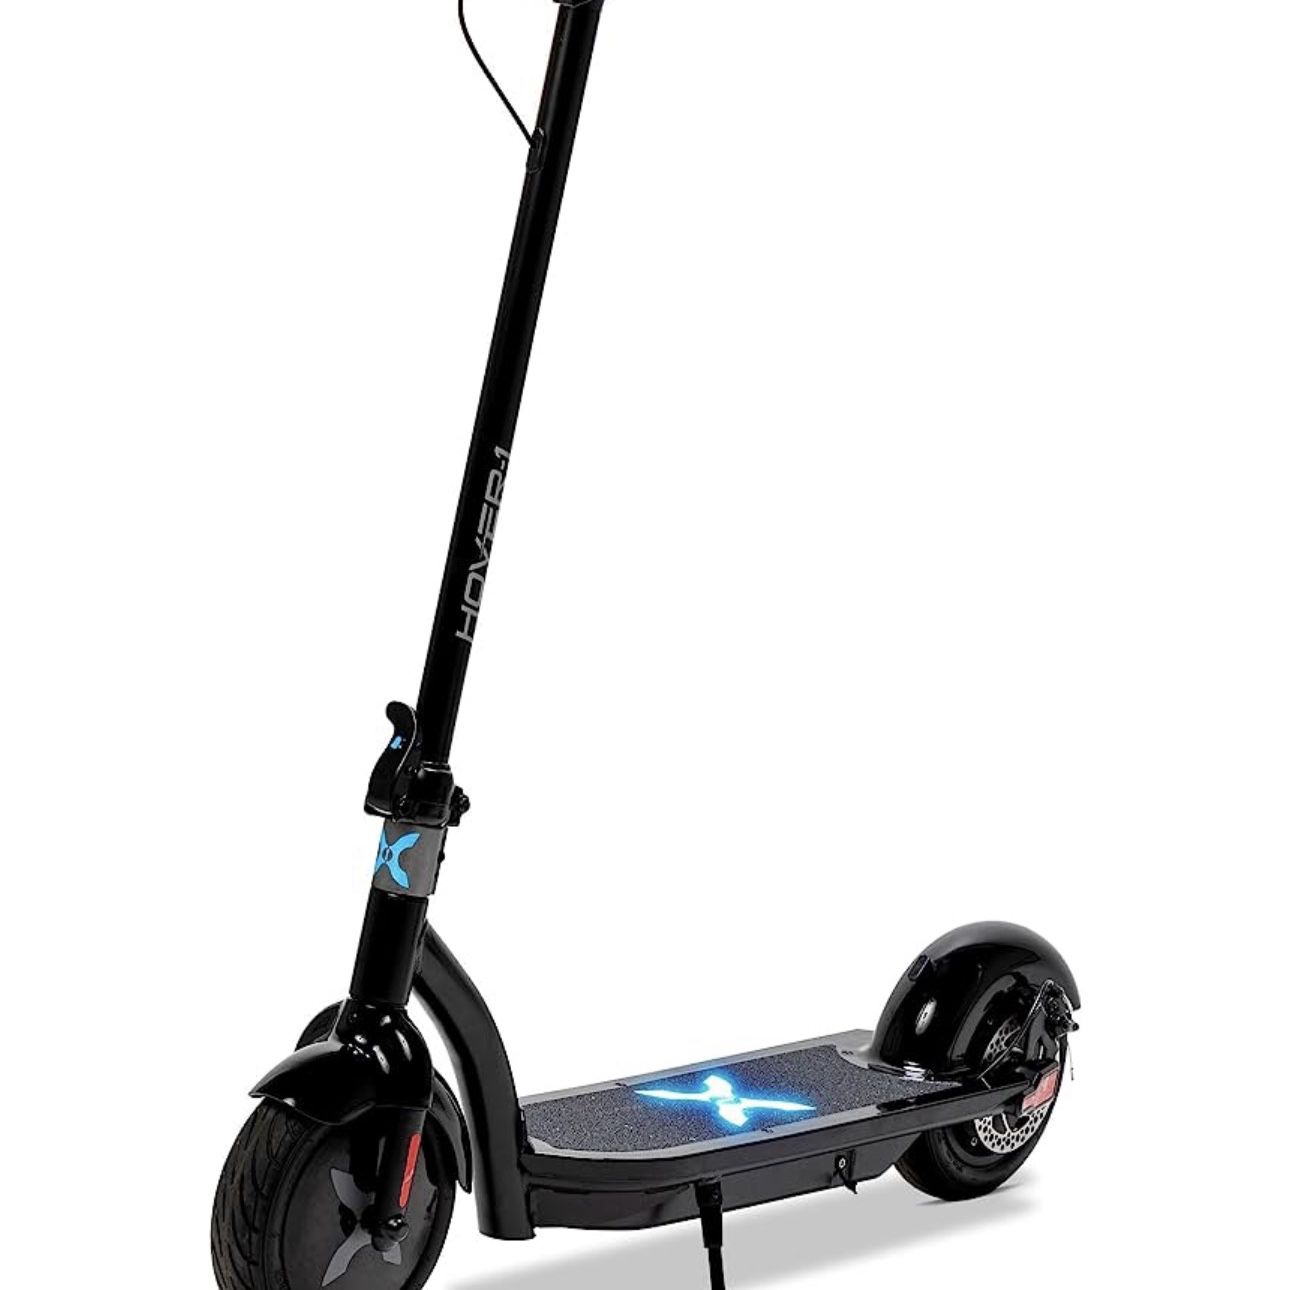 Hover-1 Alpha Electric Scooter | 18MPH, 12M Range, 5HR Charge, LCD Display, 10 Inch High-Grip Tires, 264LB Max Weight, Cert. & Tested - Safe for Kids,